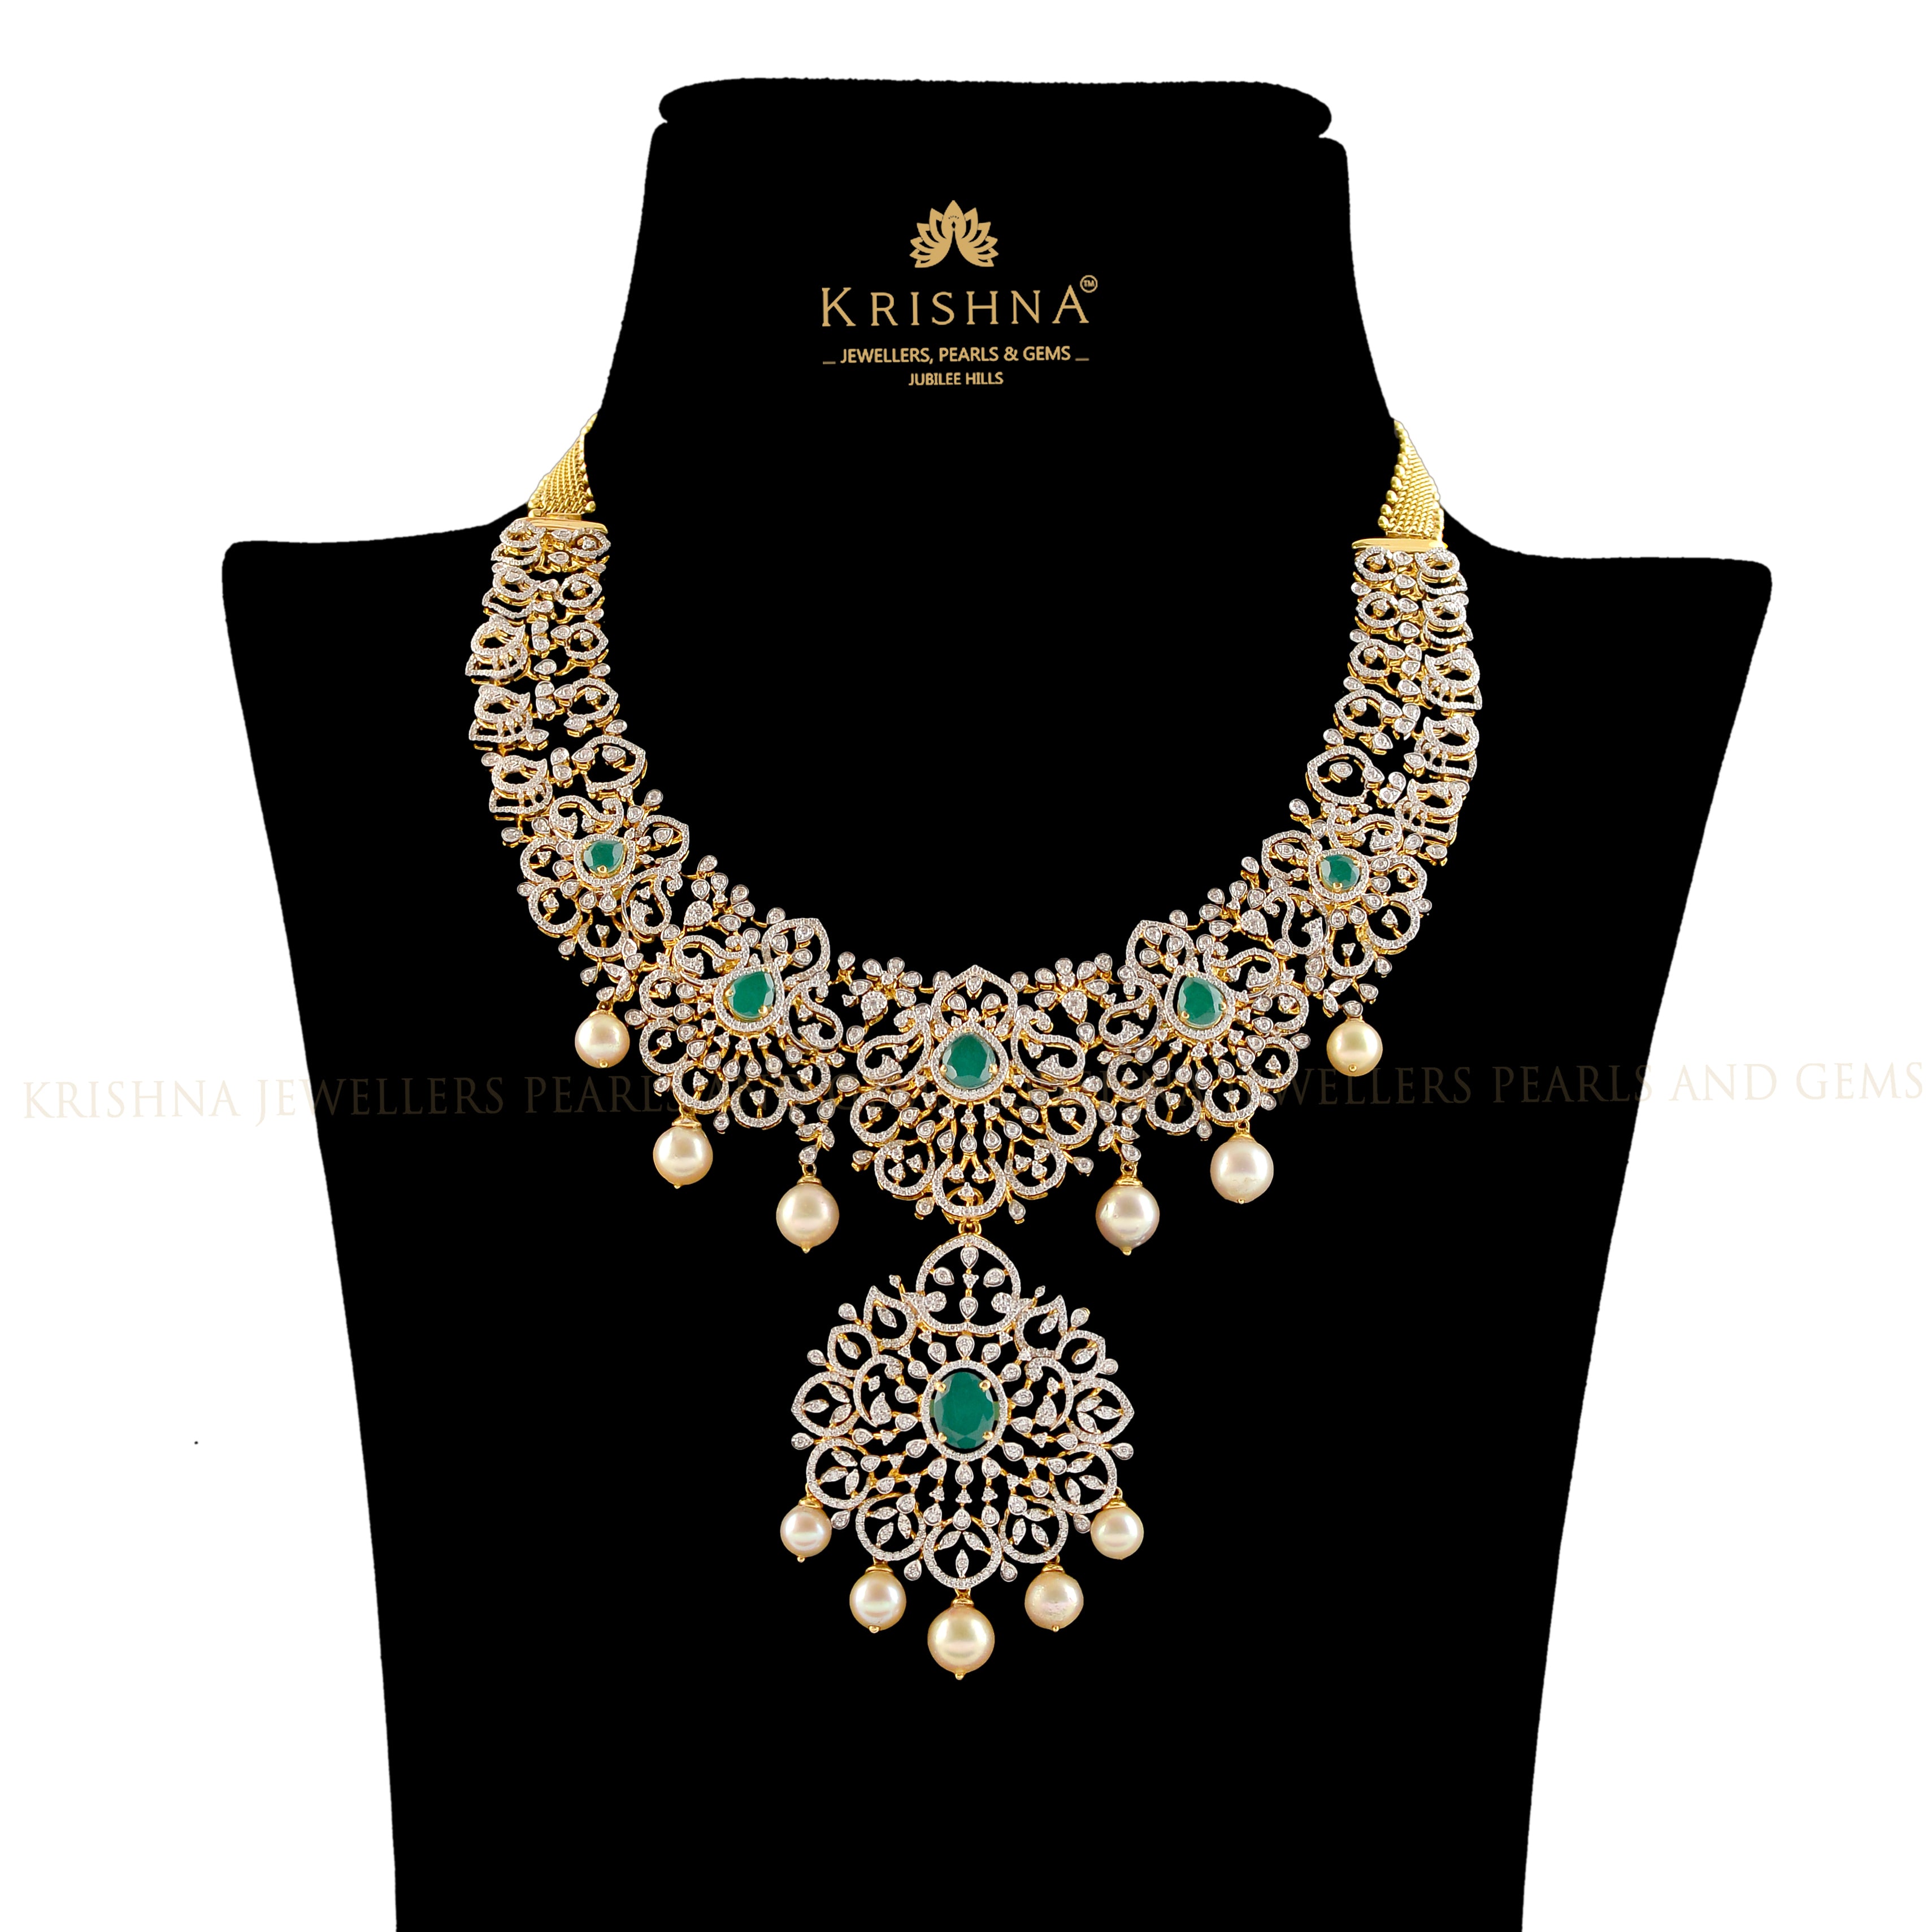 Diamond Necklace in Floral Elegance